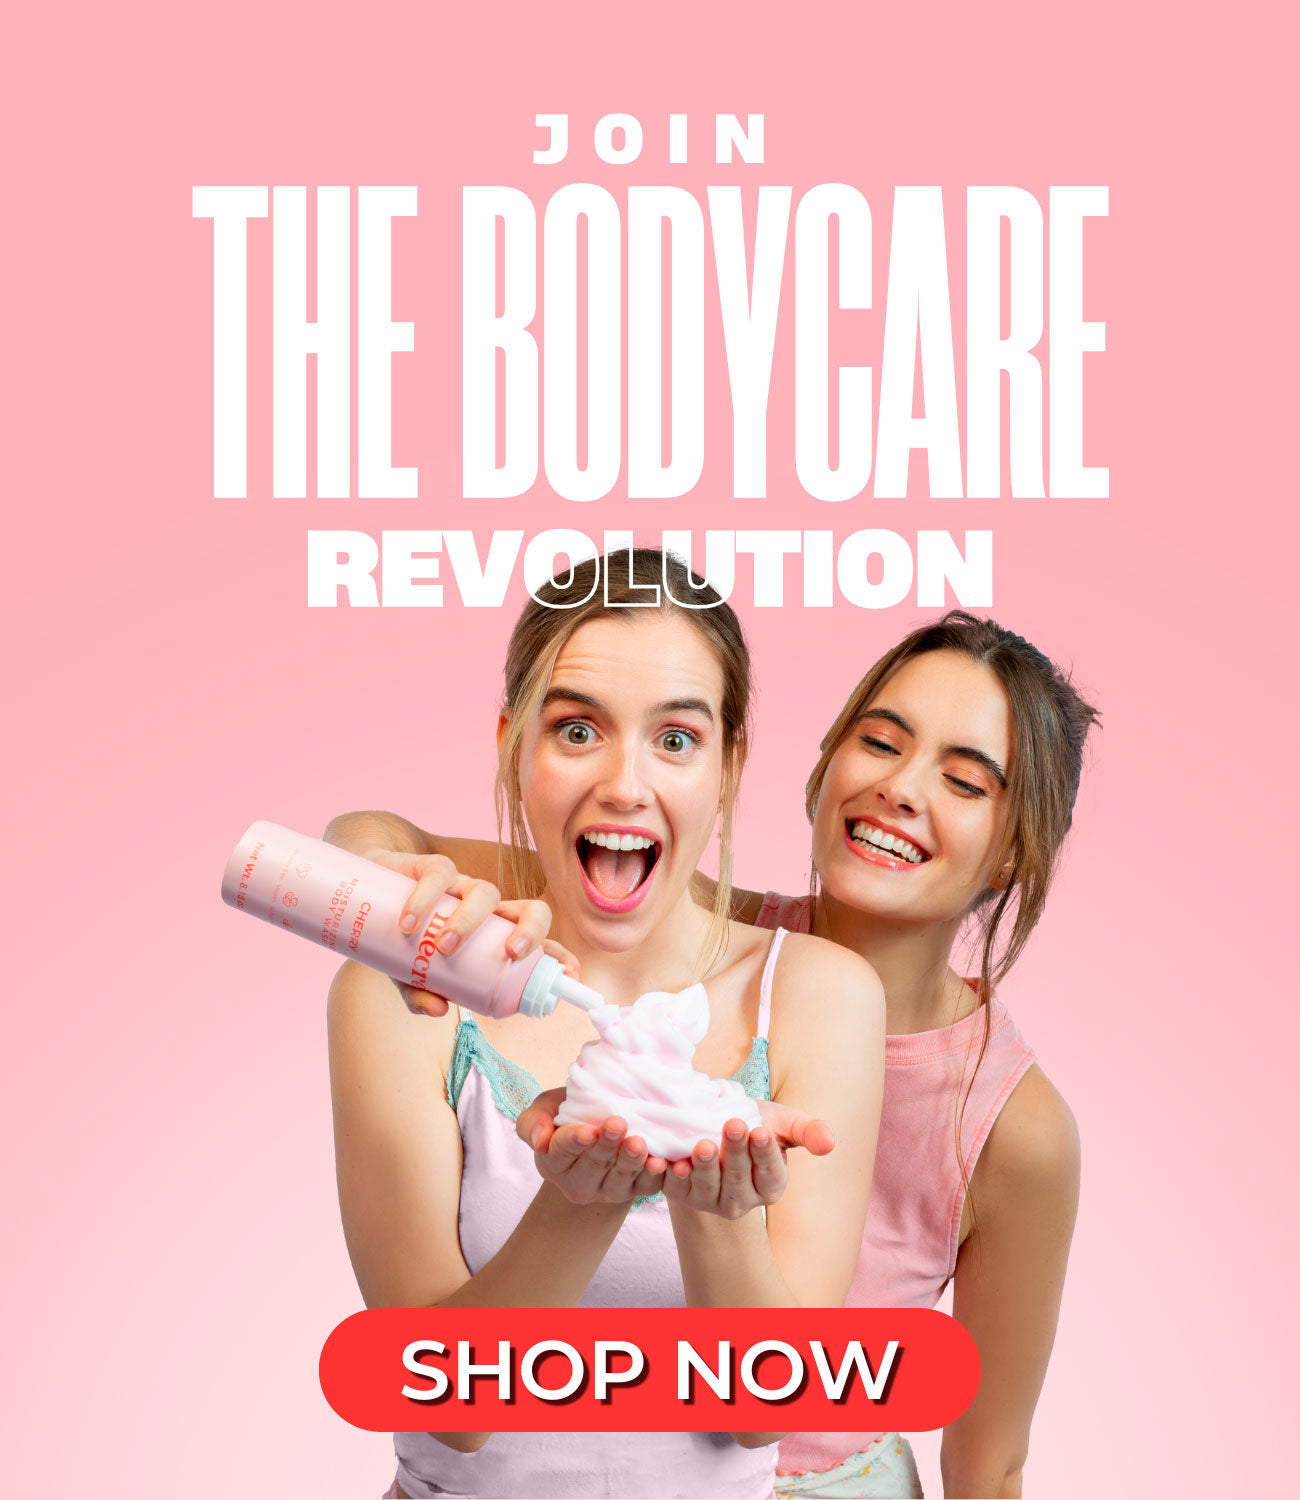 Banner reads: "Join the bodycare revolution" with an image of a girl behind another girl, applying foam to the other girl's hand.